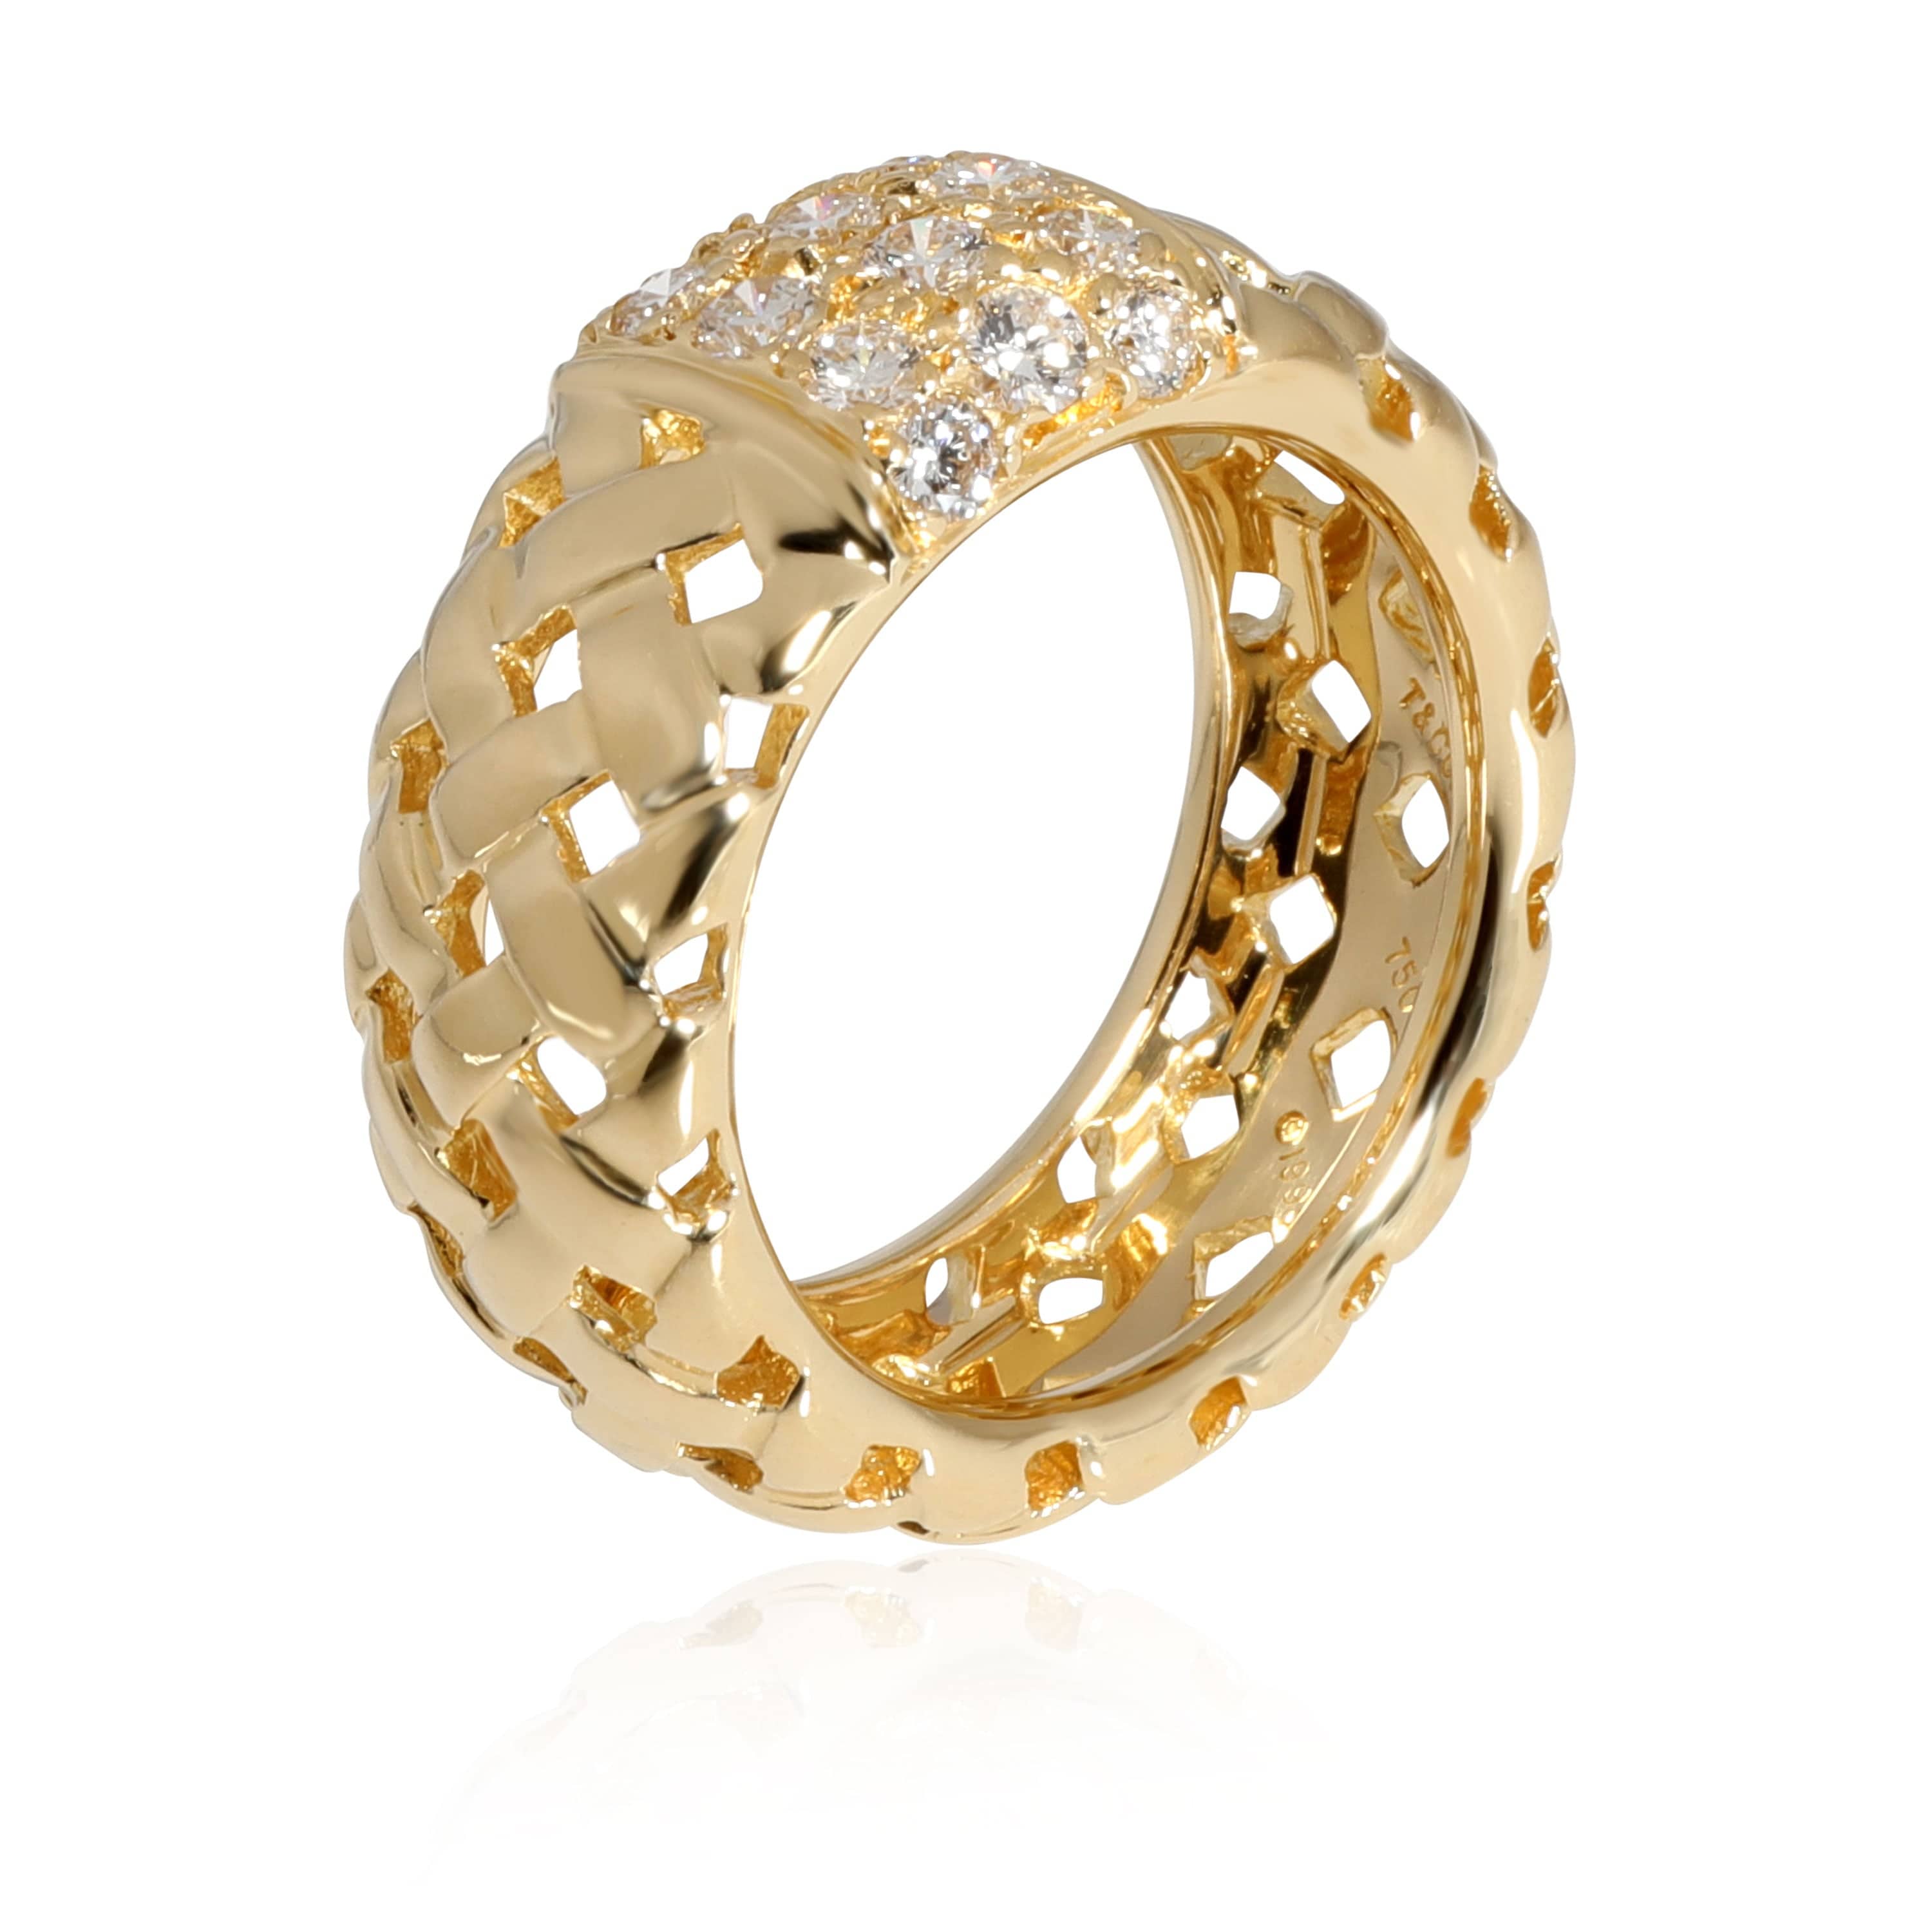 Tiffany & Co. Tiffany & Co. Vannerie Basket Weave Diamond Ring in 18K Yellow Gold 3/4 Ctw